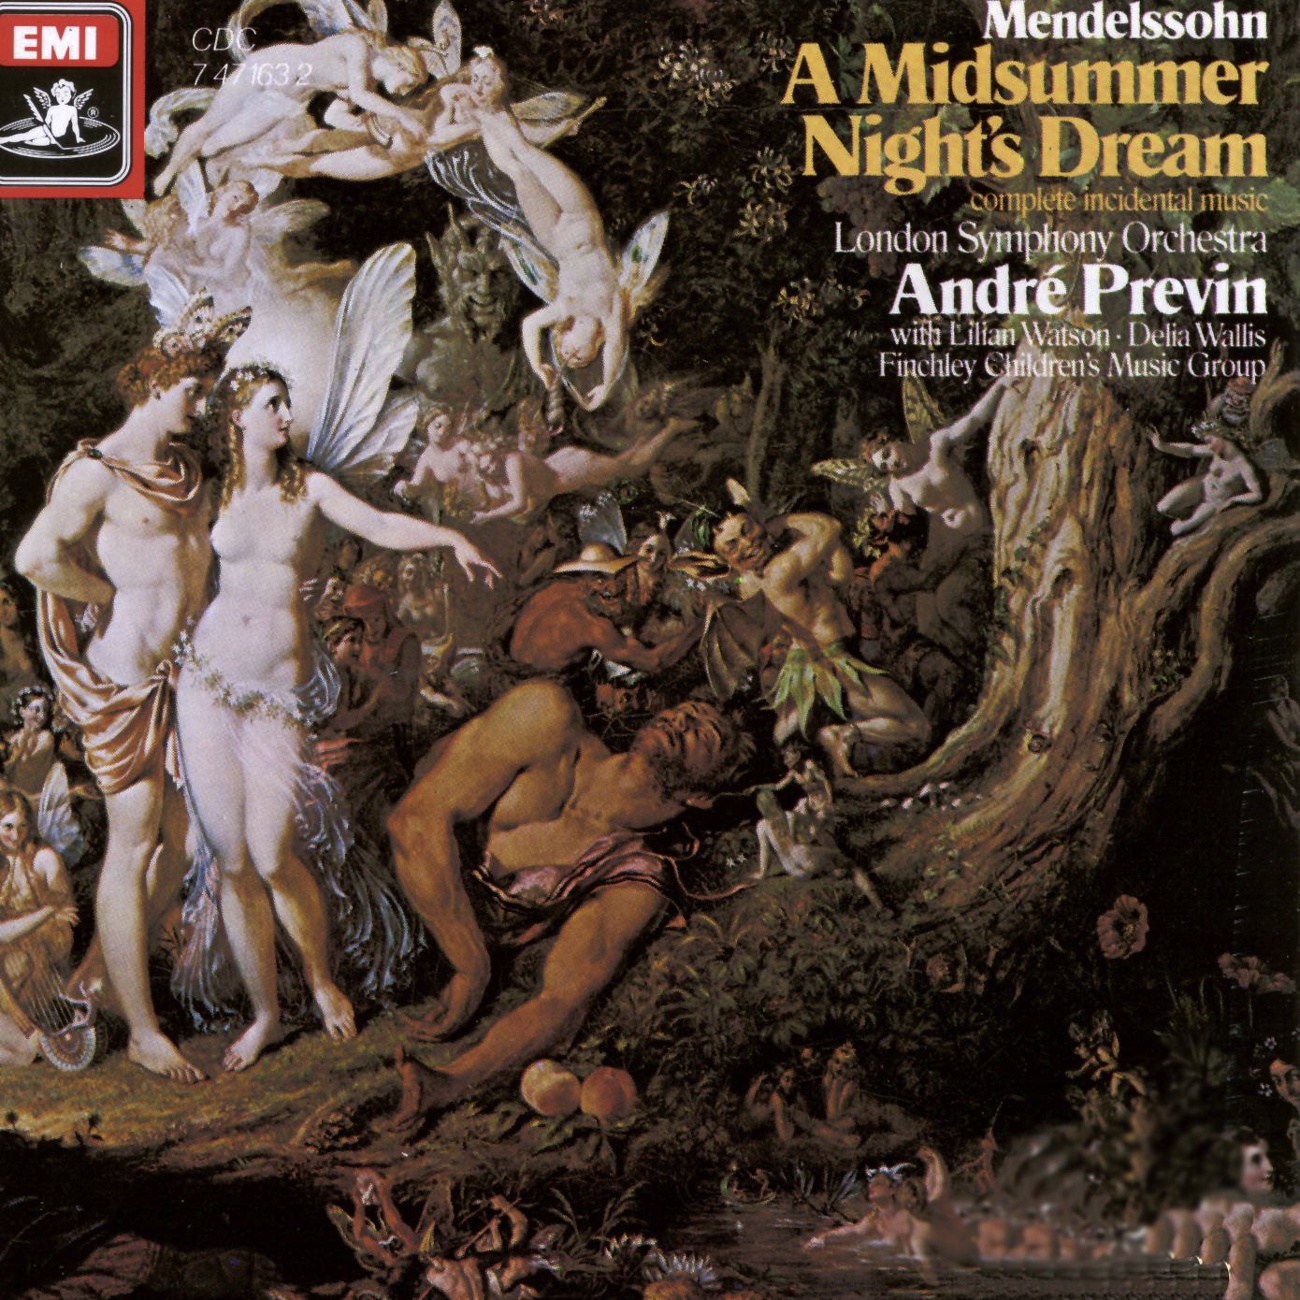 A Midsummer Night's Dream - incidental music Opp. 21 and 61 (1985 Digital Remaster): Finale: 'Through the house' (Act 5)